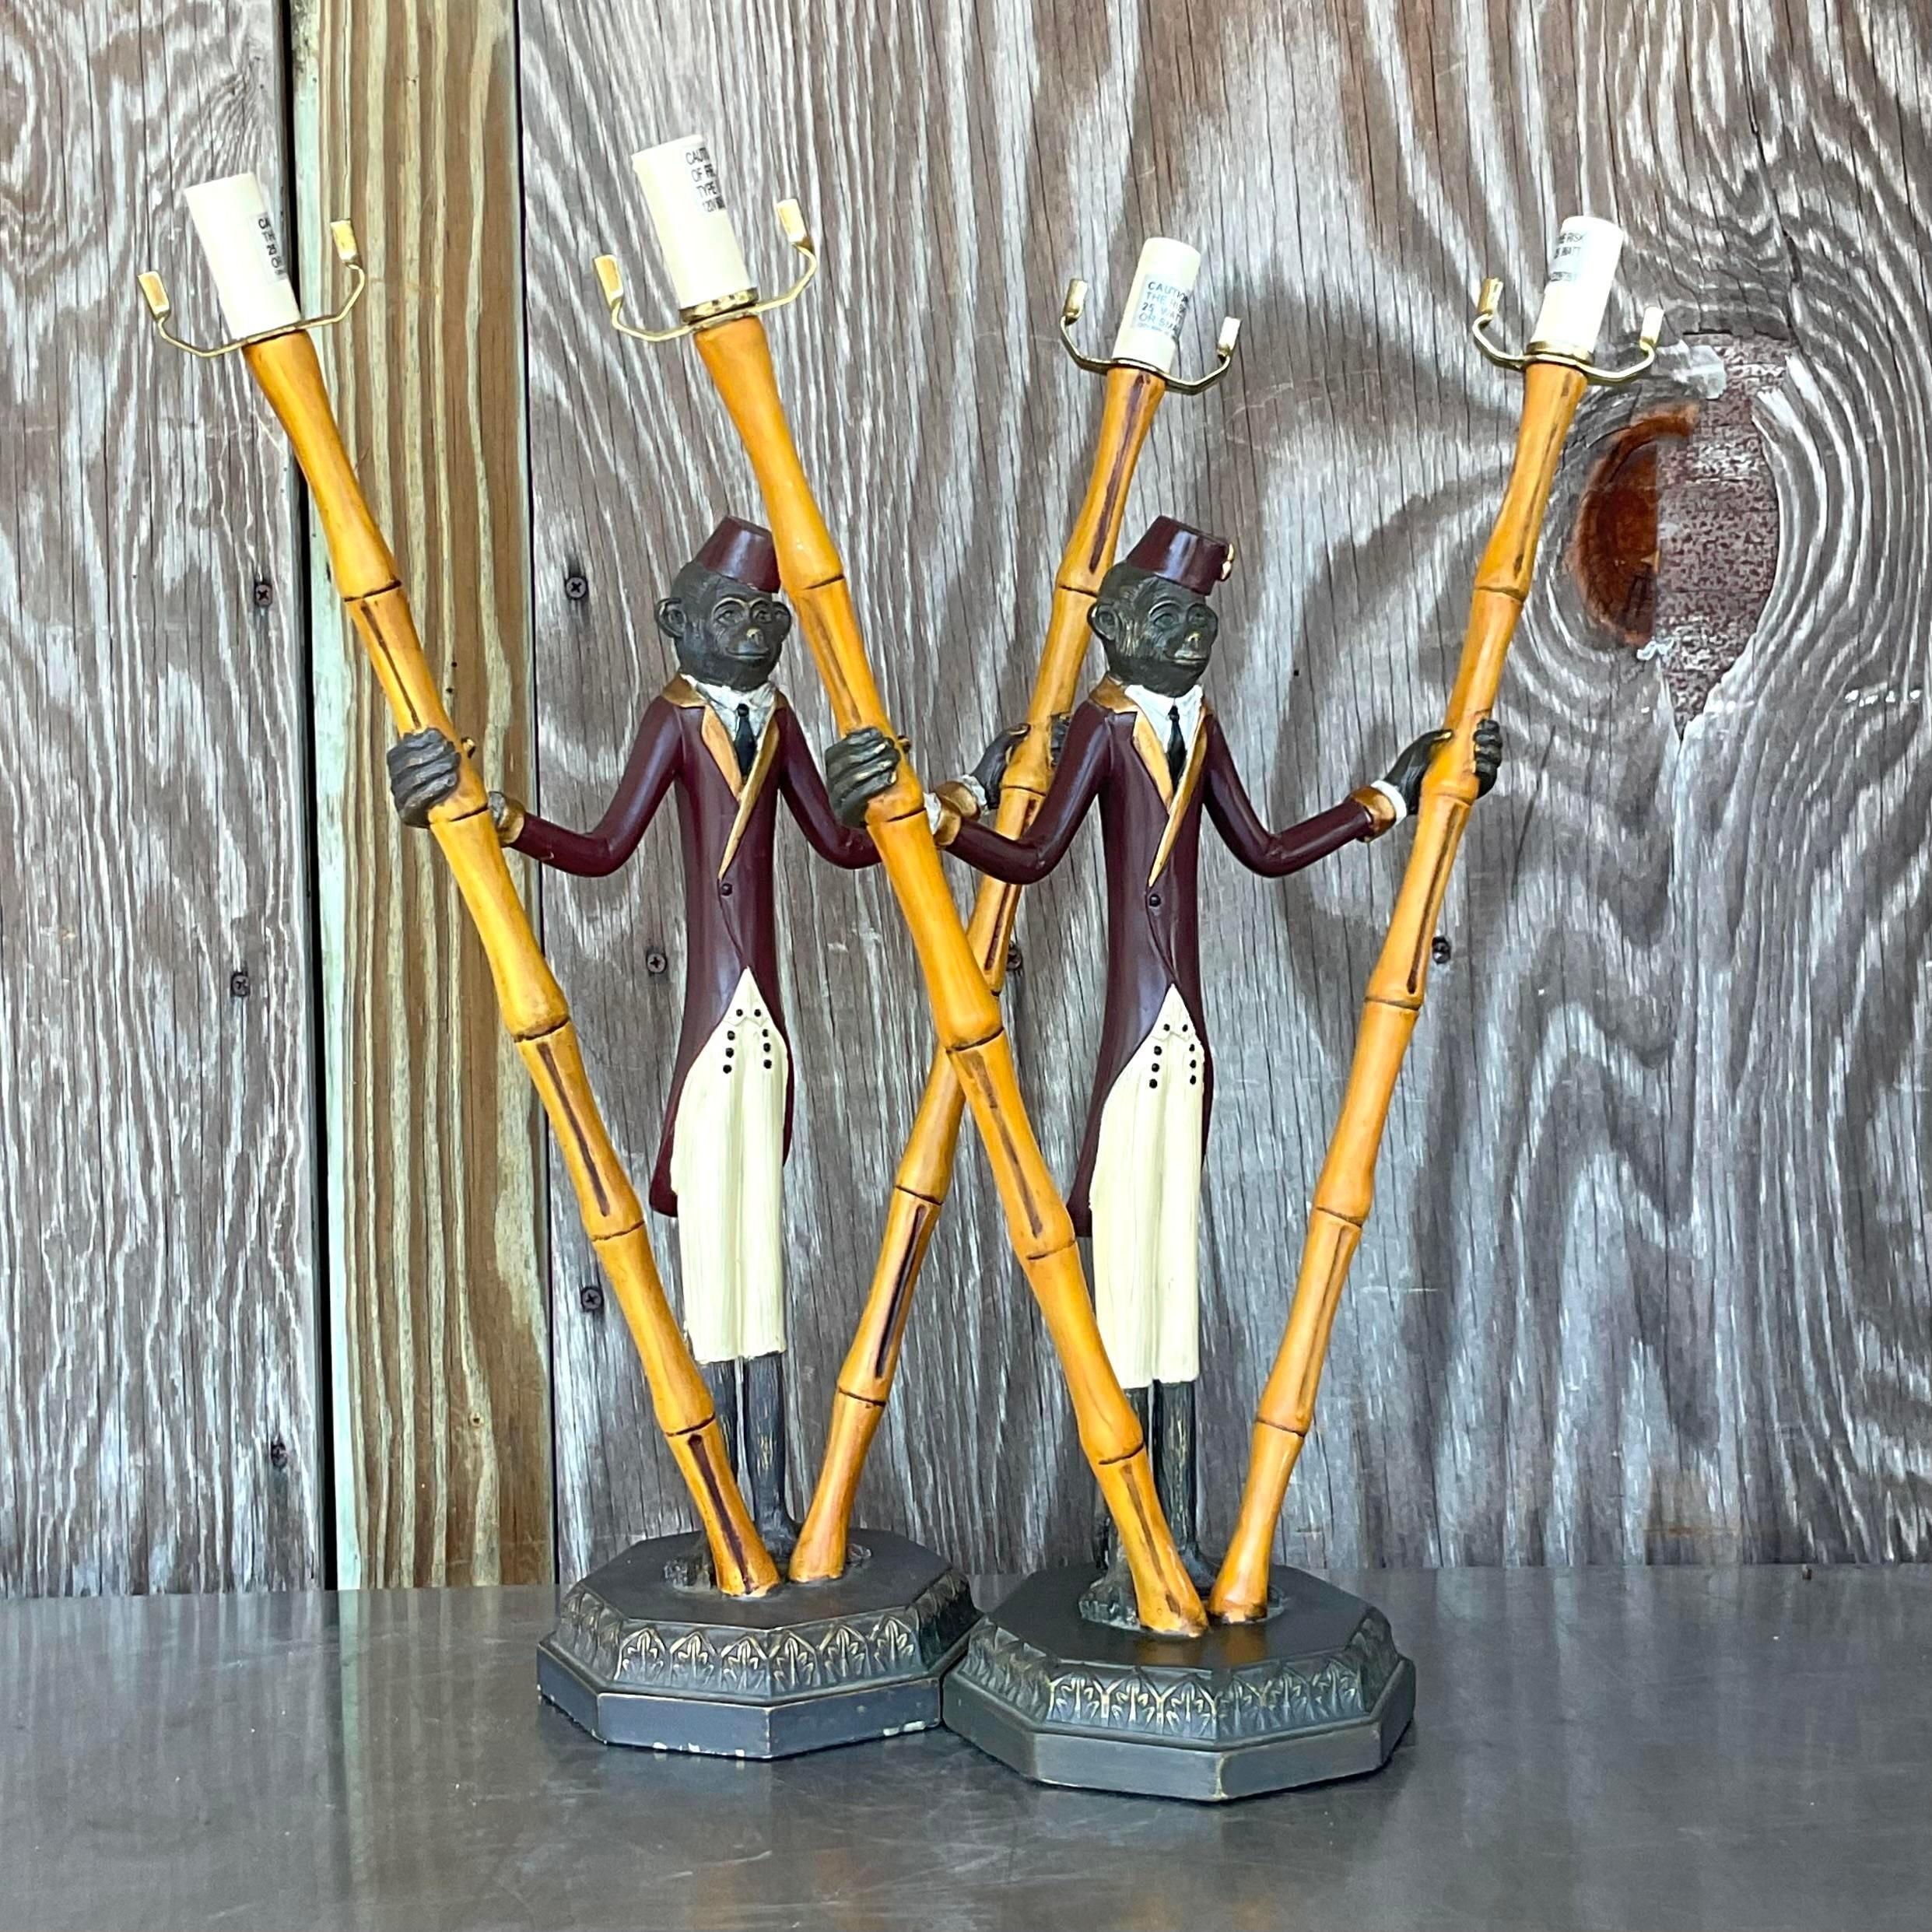 Vintage Coastal Bamboo Monkey Lamps - a Pair In Good Condition For Sale In west palm beach, FL